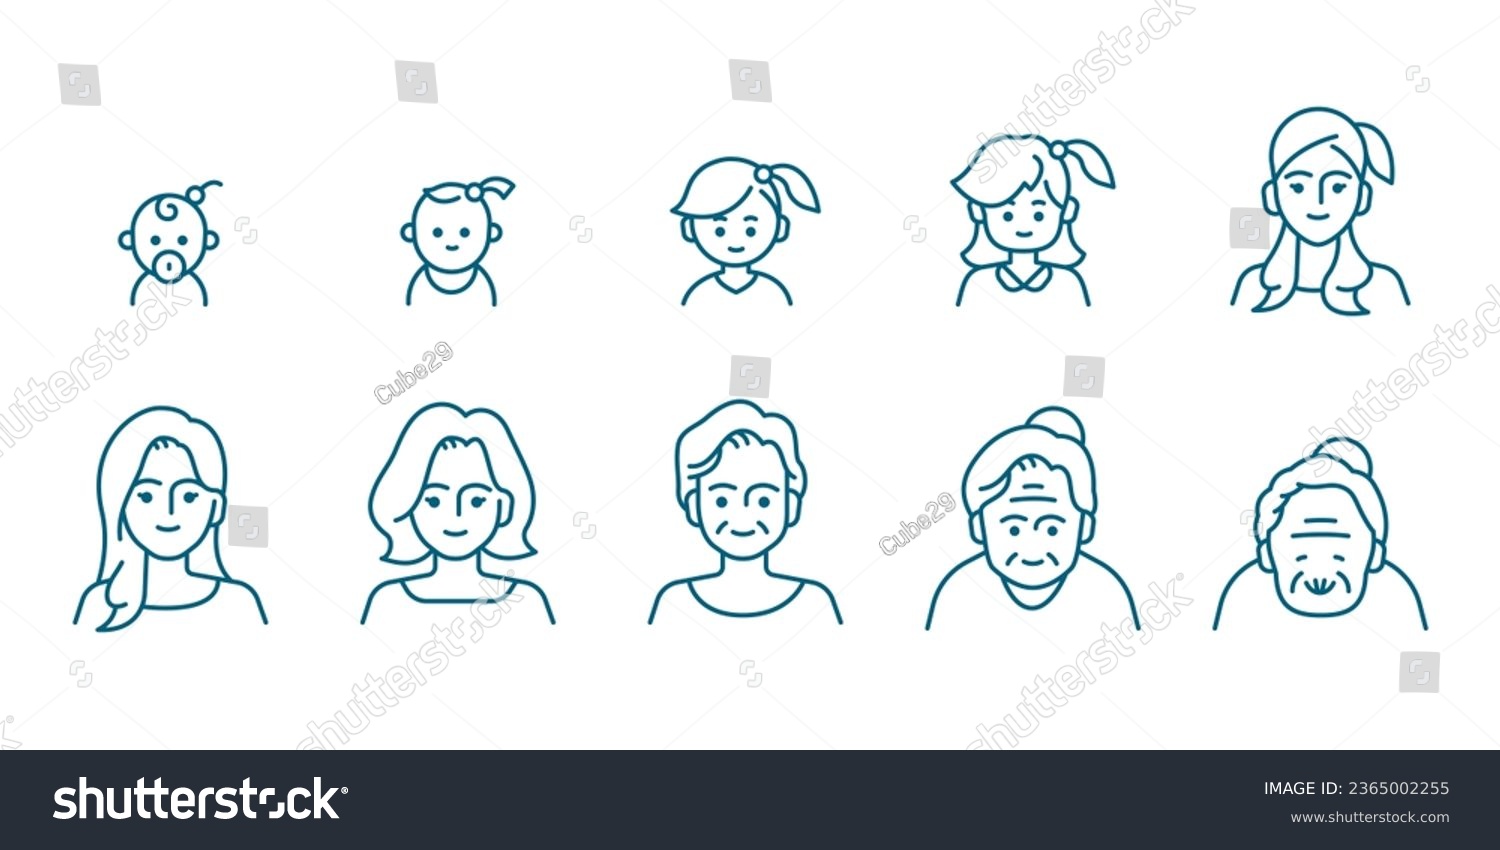 SVG of Female portrait at different ages, preschooler, kid, primary school, senior school, teenager, young, elderly illustration life cycle concept. Editable Vector Stroke. svg